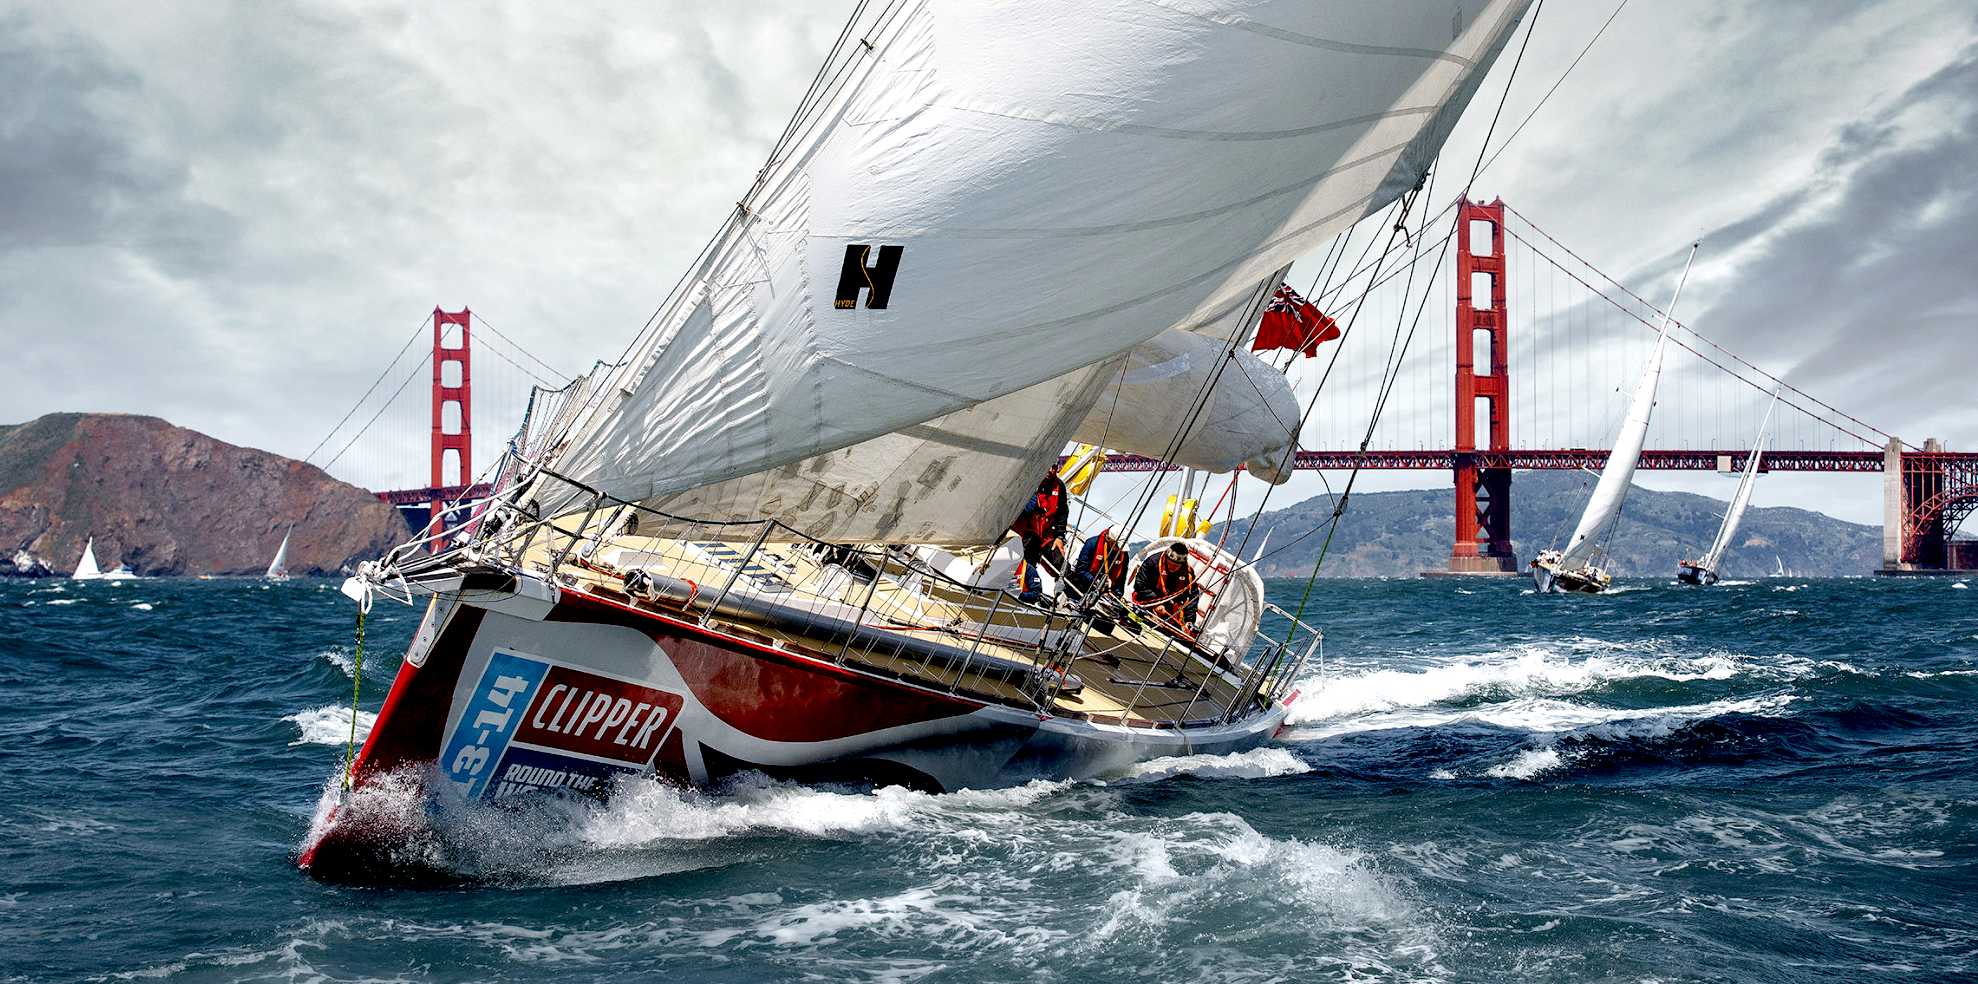 GLOBAL CHALLENGE ROUND THE WORLD SAILING YACHTS OCEAN RACE